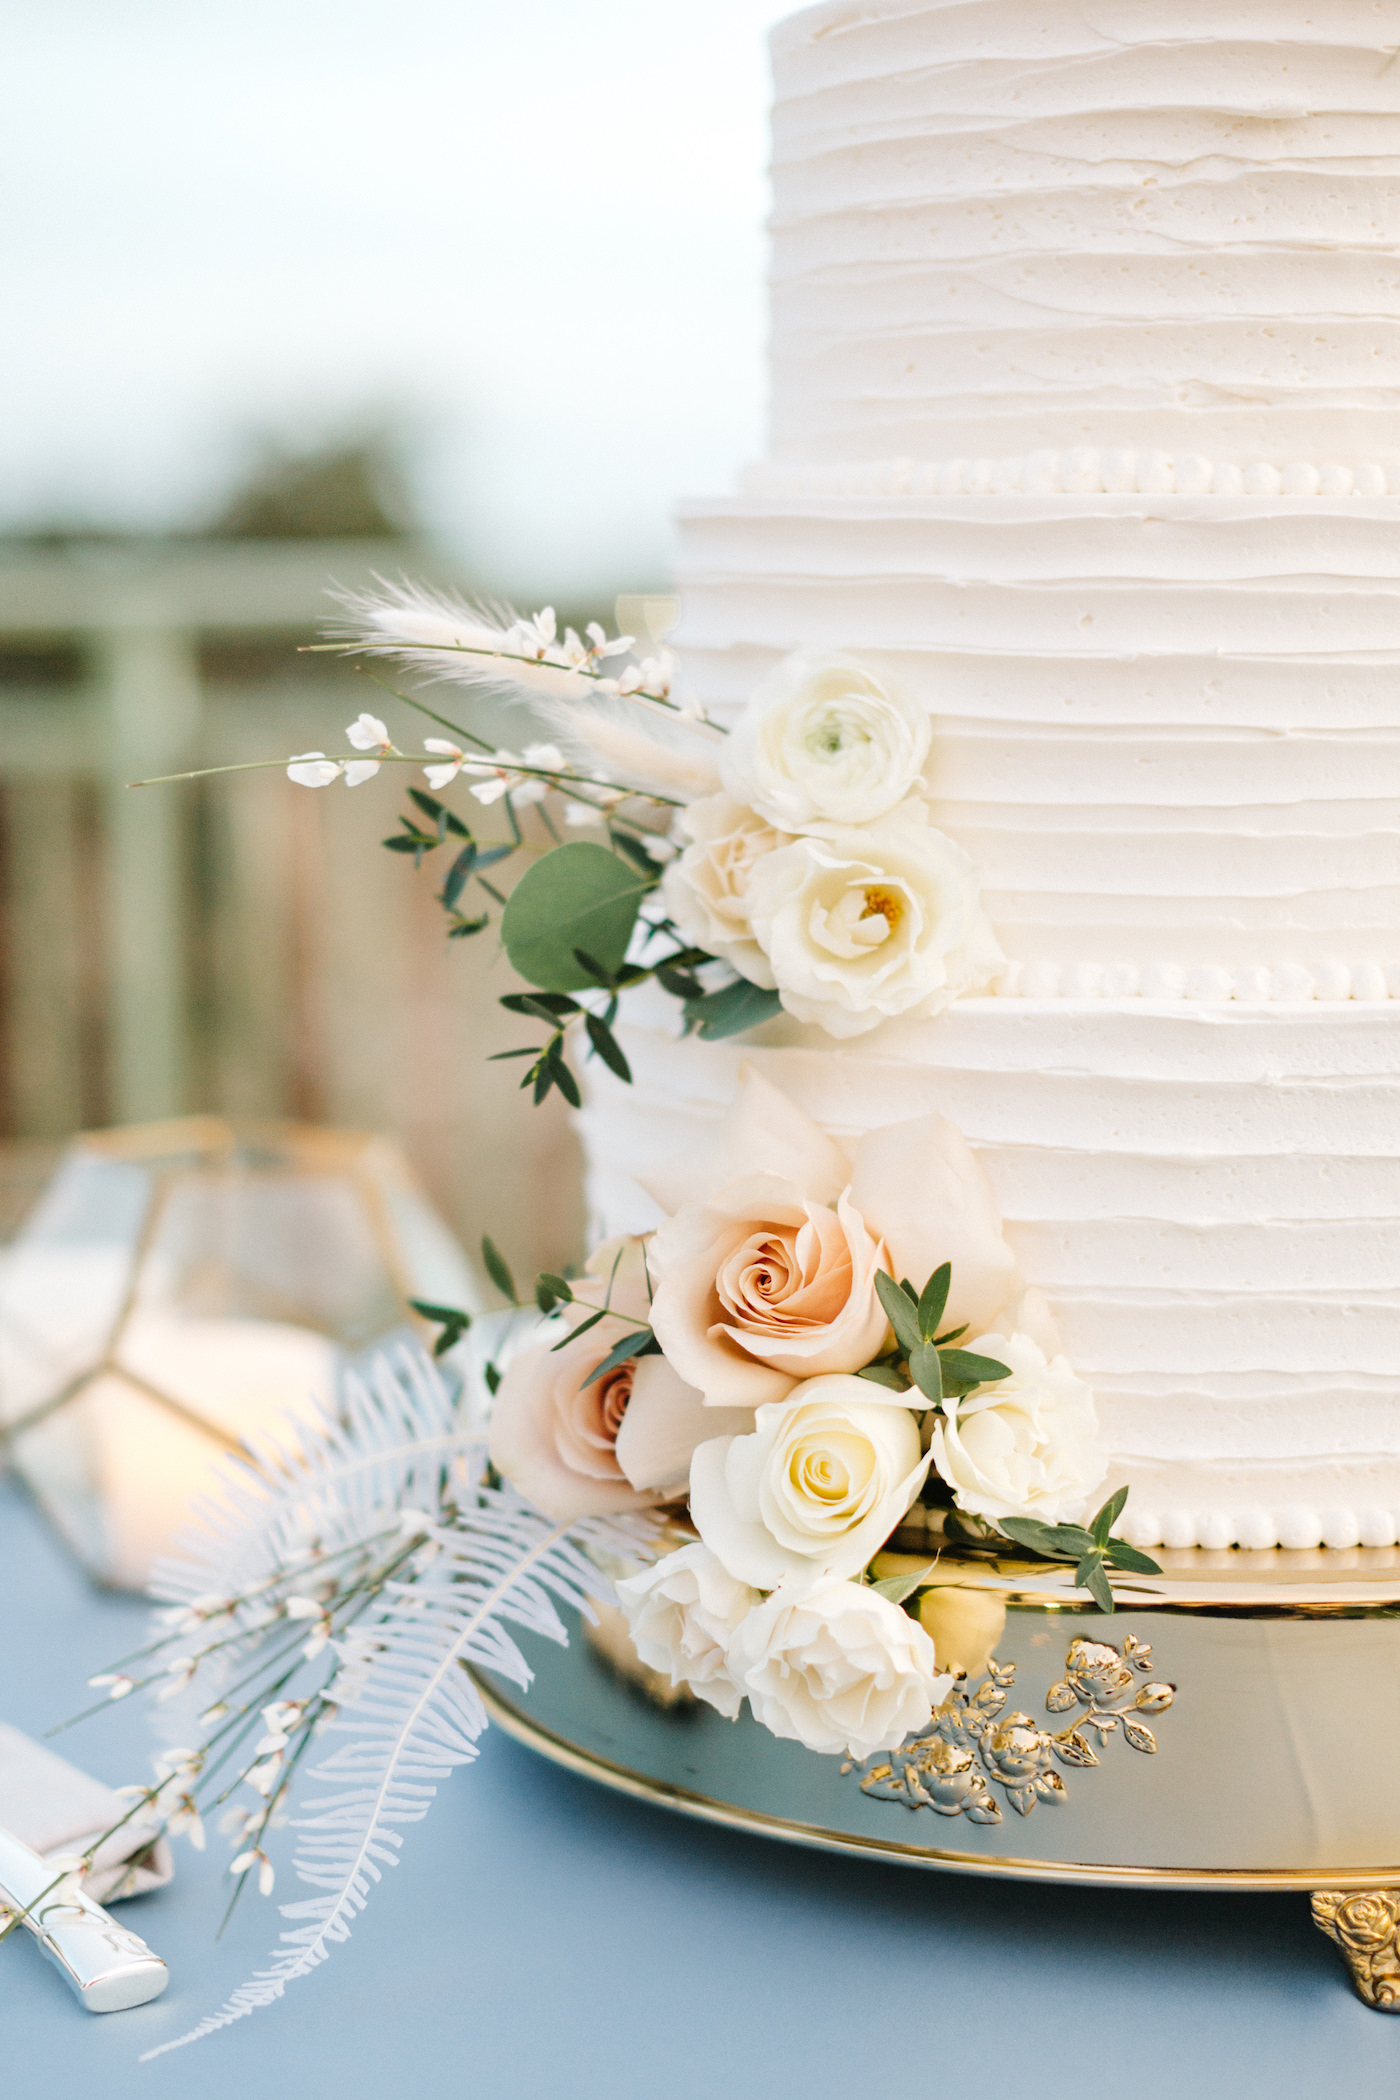 Elegant Buttercream Wedding Cake, White Textured Frosting the Boho Chic Inspired Floral Accents, Blush Pink Roses, Ivory Flowers, Pampas Grass, Gold Cake Stand